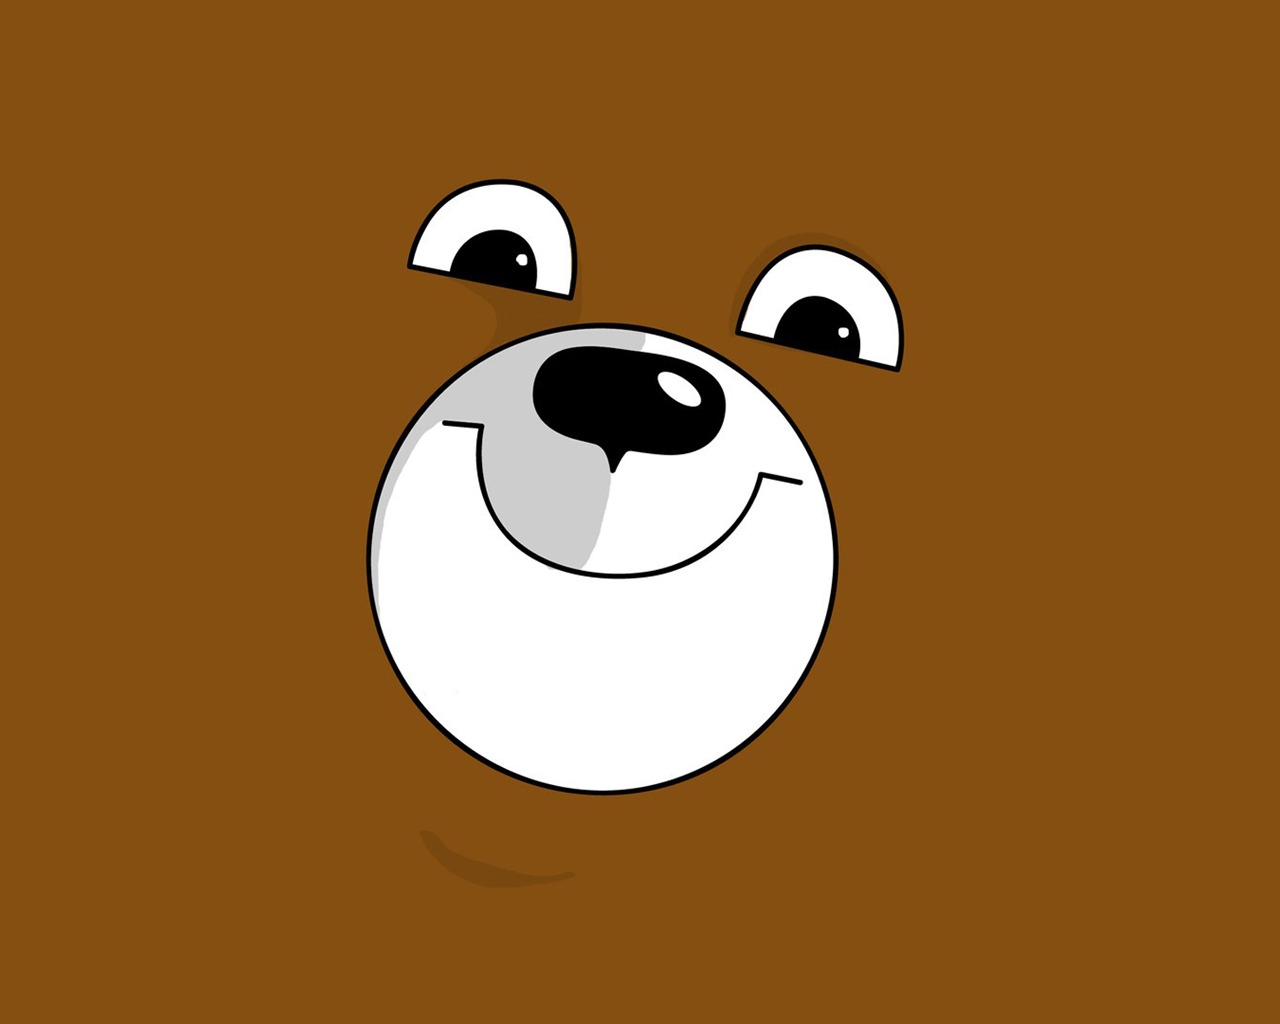 Bear Face for 1280 x 1024 resolution